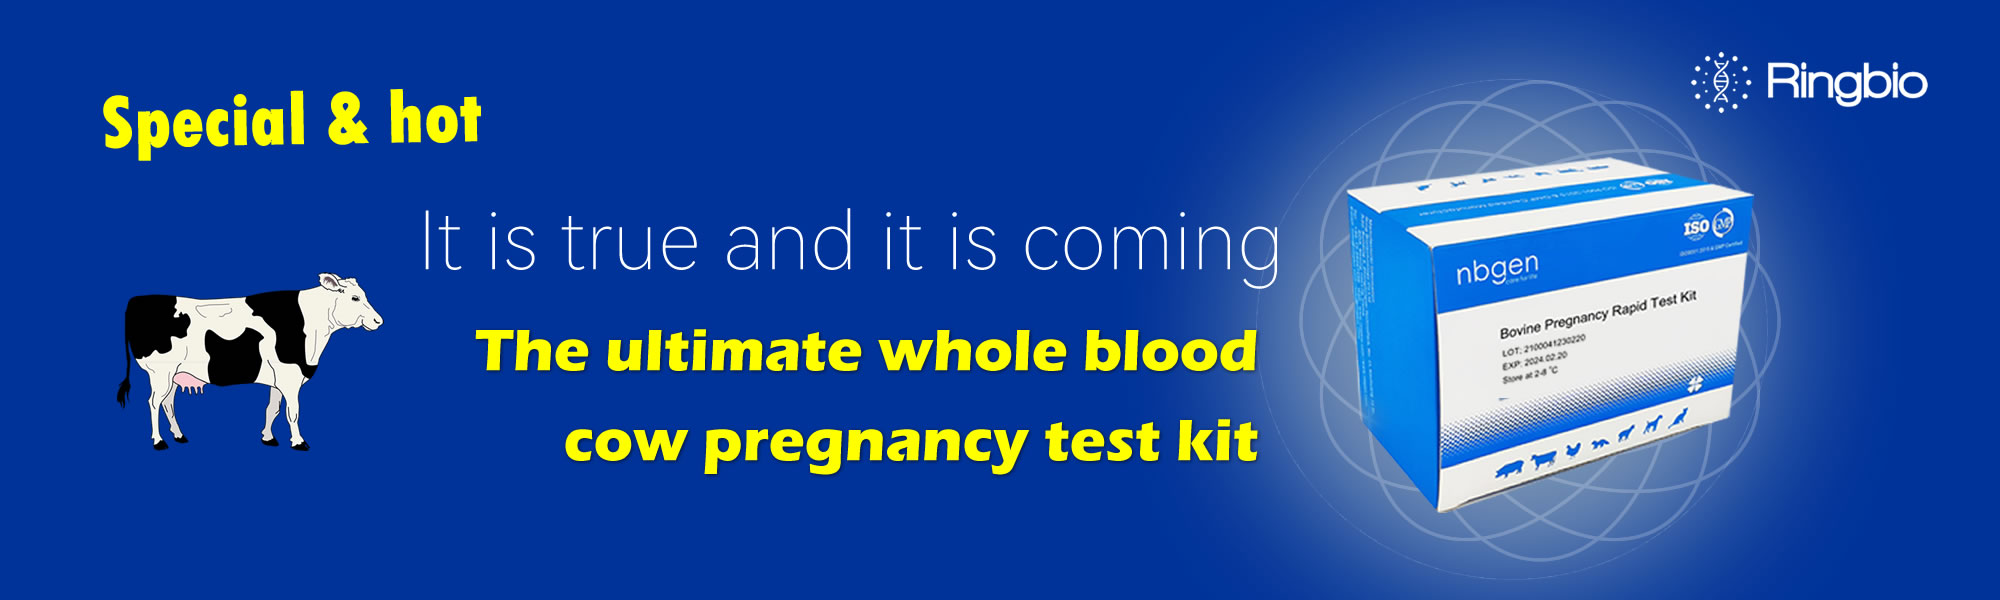 The whole blood rapid cow pregnancy test kit is here